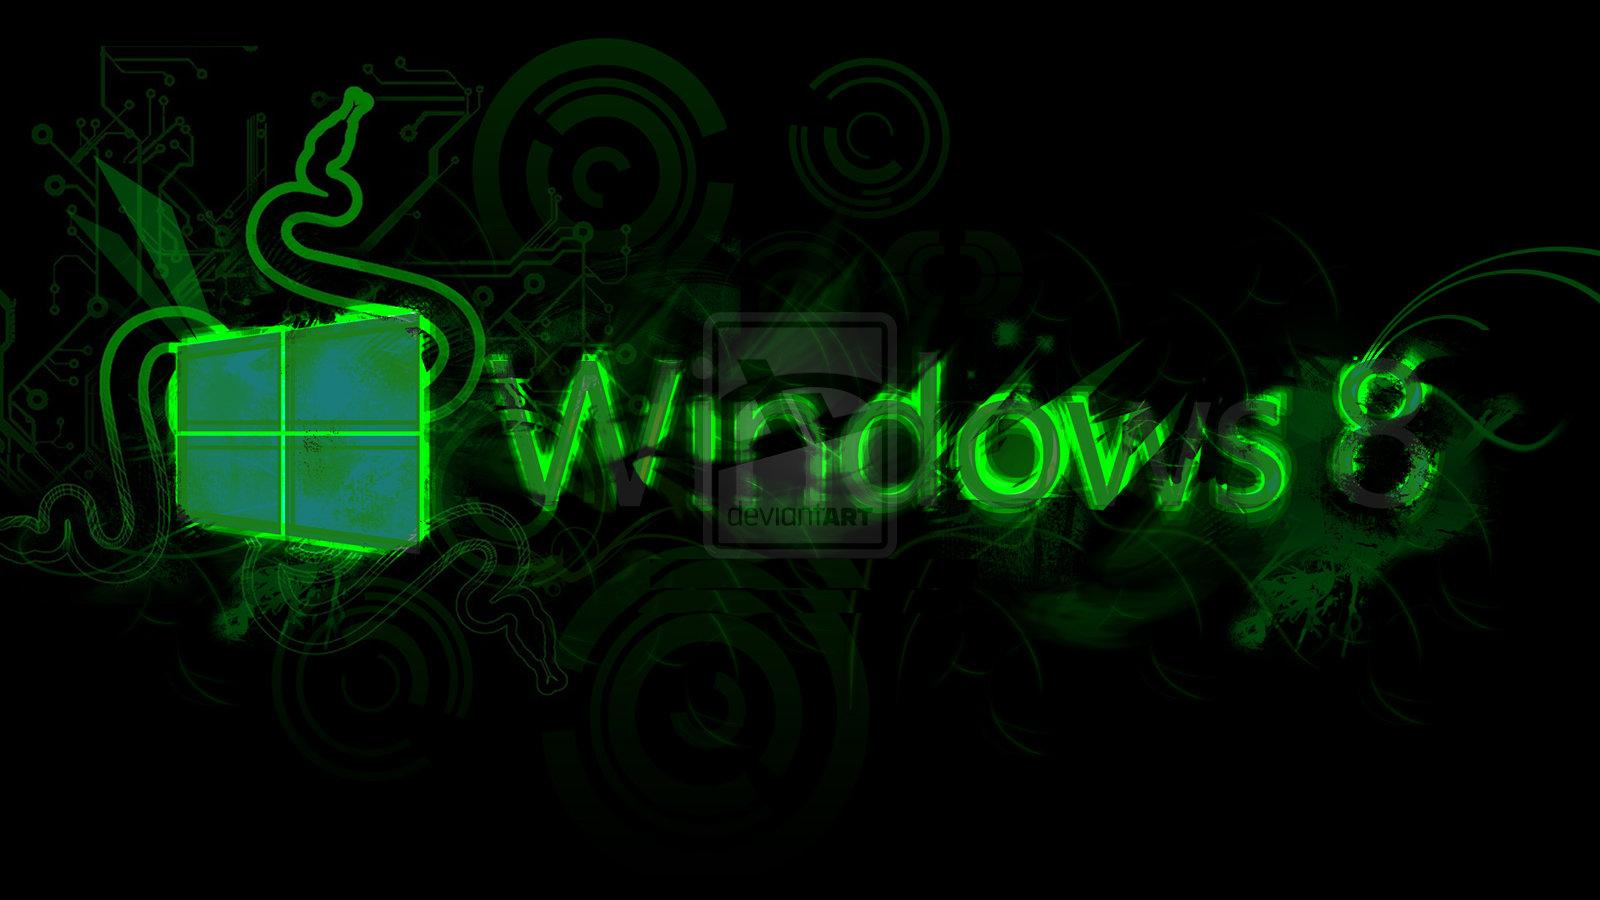 Windows 8 HD Wallpapers Windows 8 Images Free Cool Backgrounds